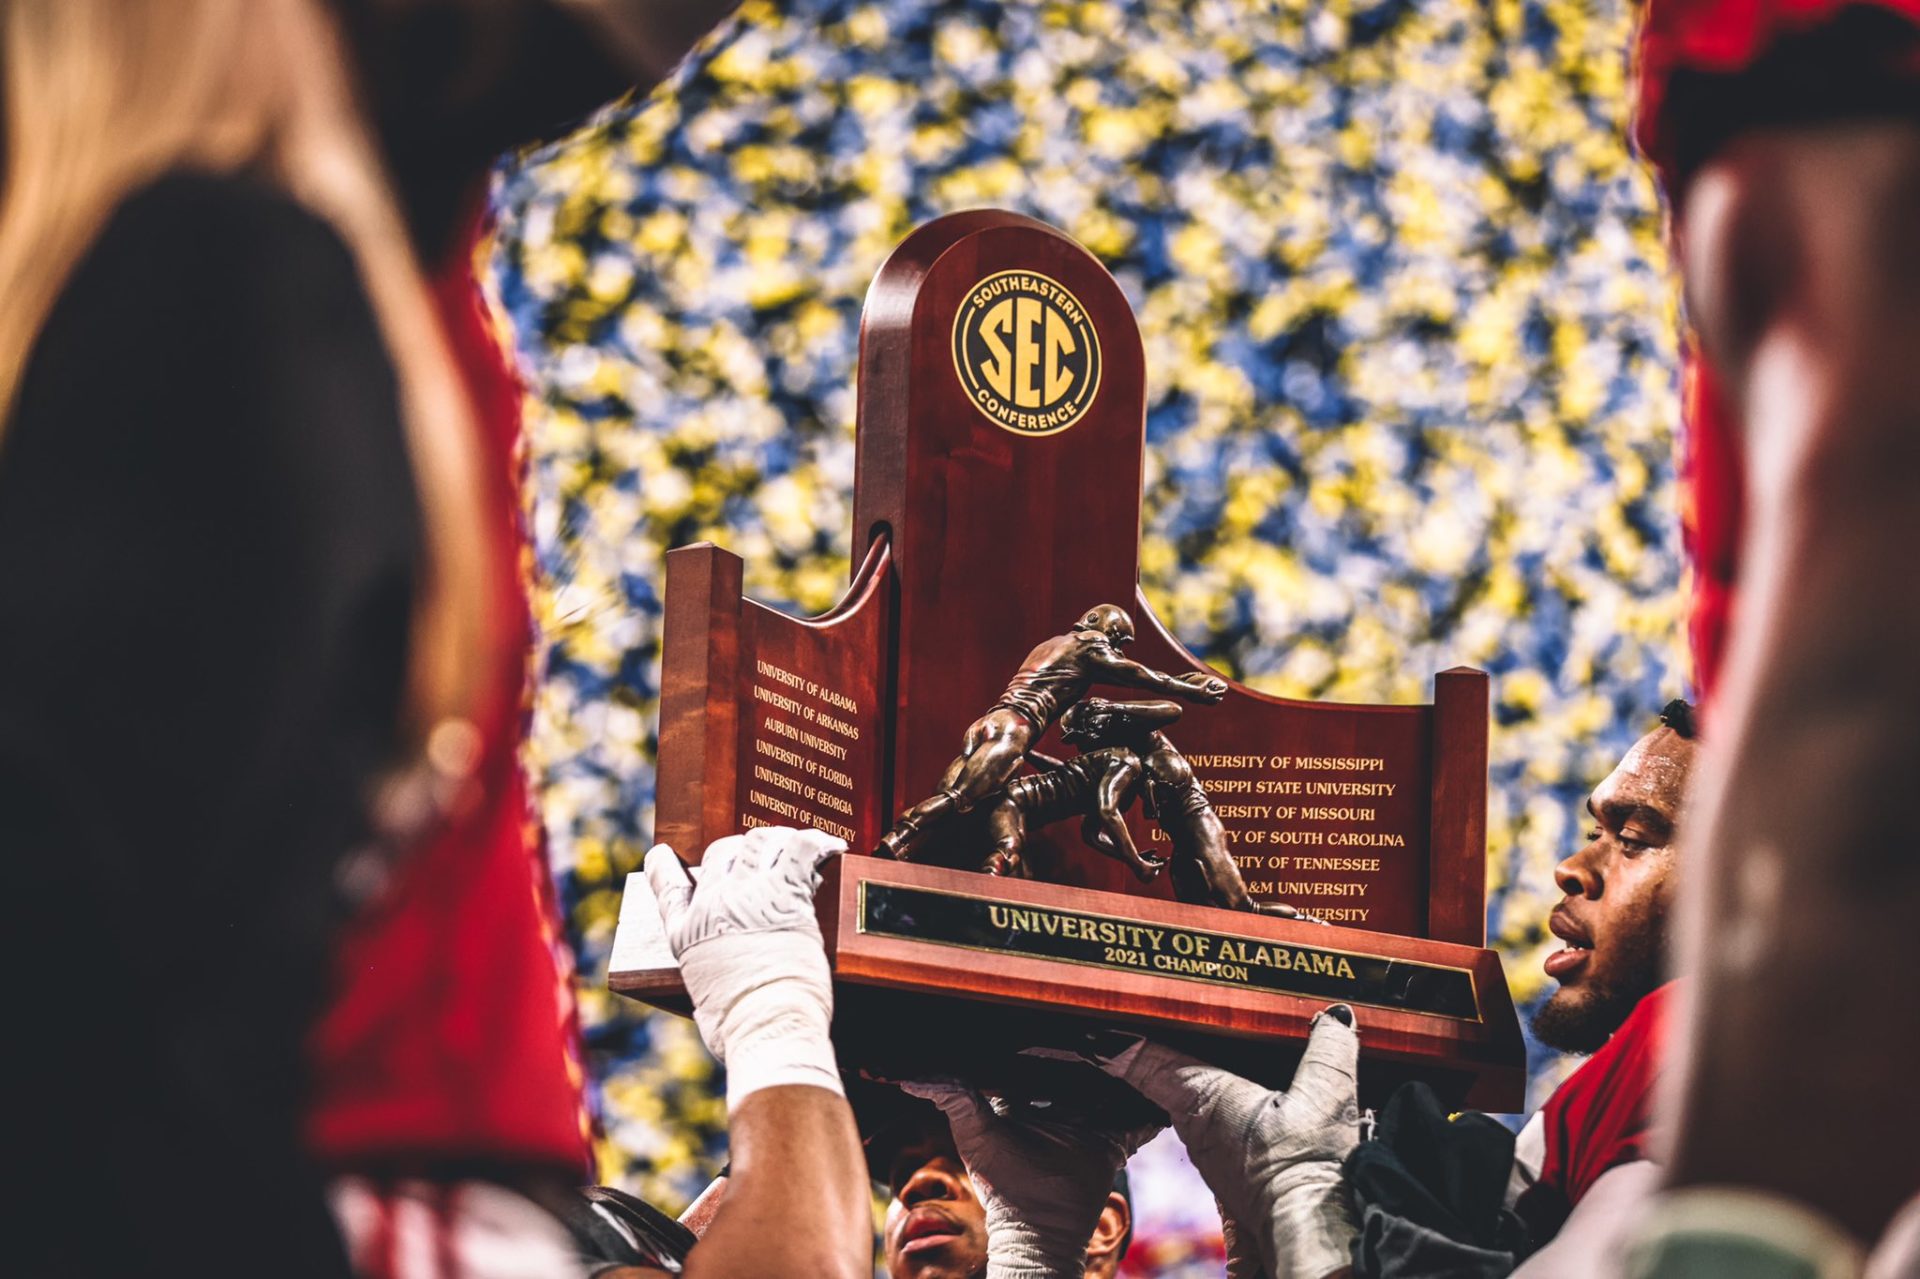 Alabama hammers for second consecutive SEC championship